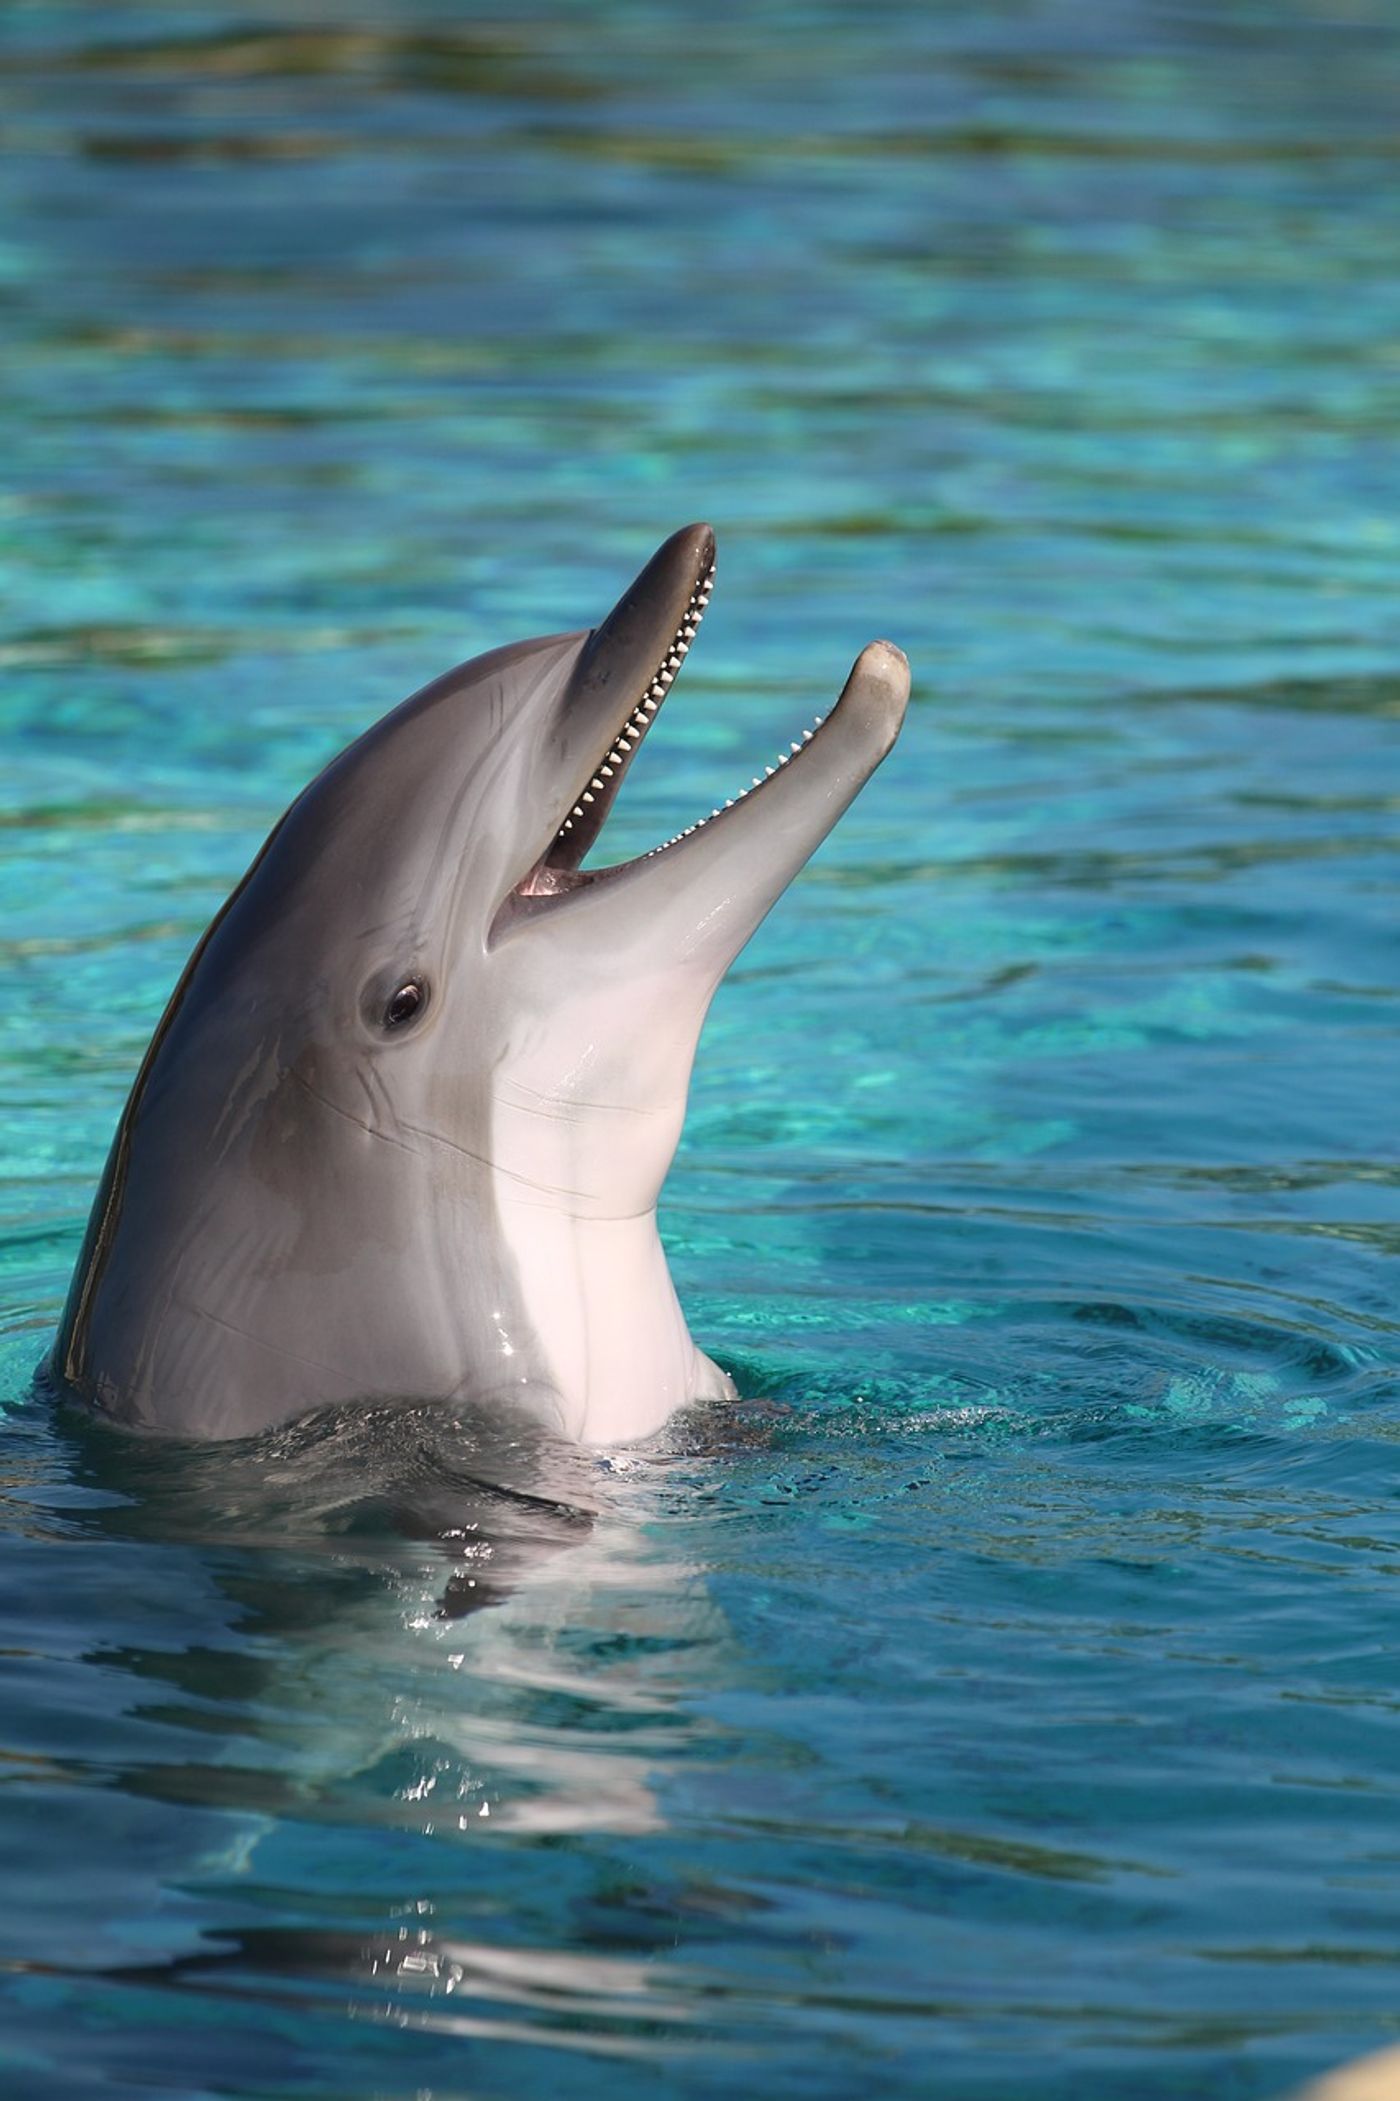 Male dolphins might be able to increase their odds of mating by presenting the female with a gift.